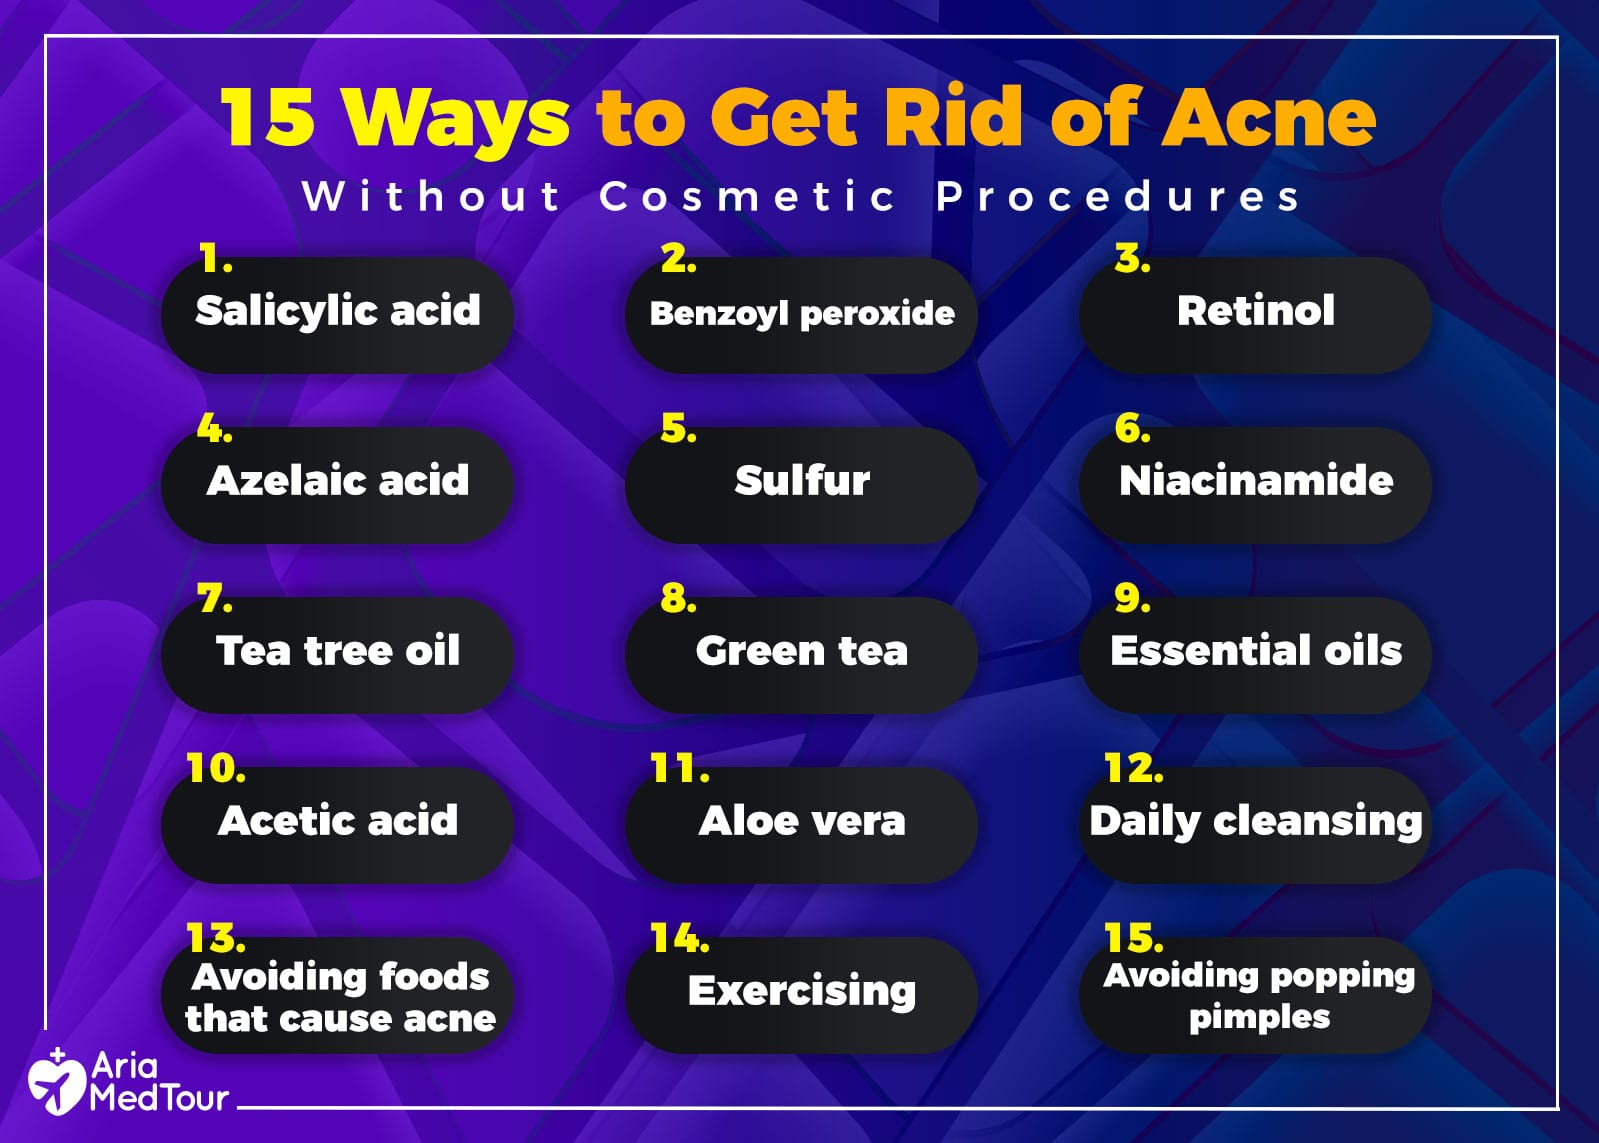 How to get rid of acne: 15 ways to get rid of acne (pimples) without cosmetic procedures